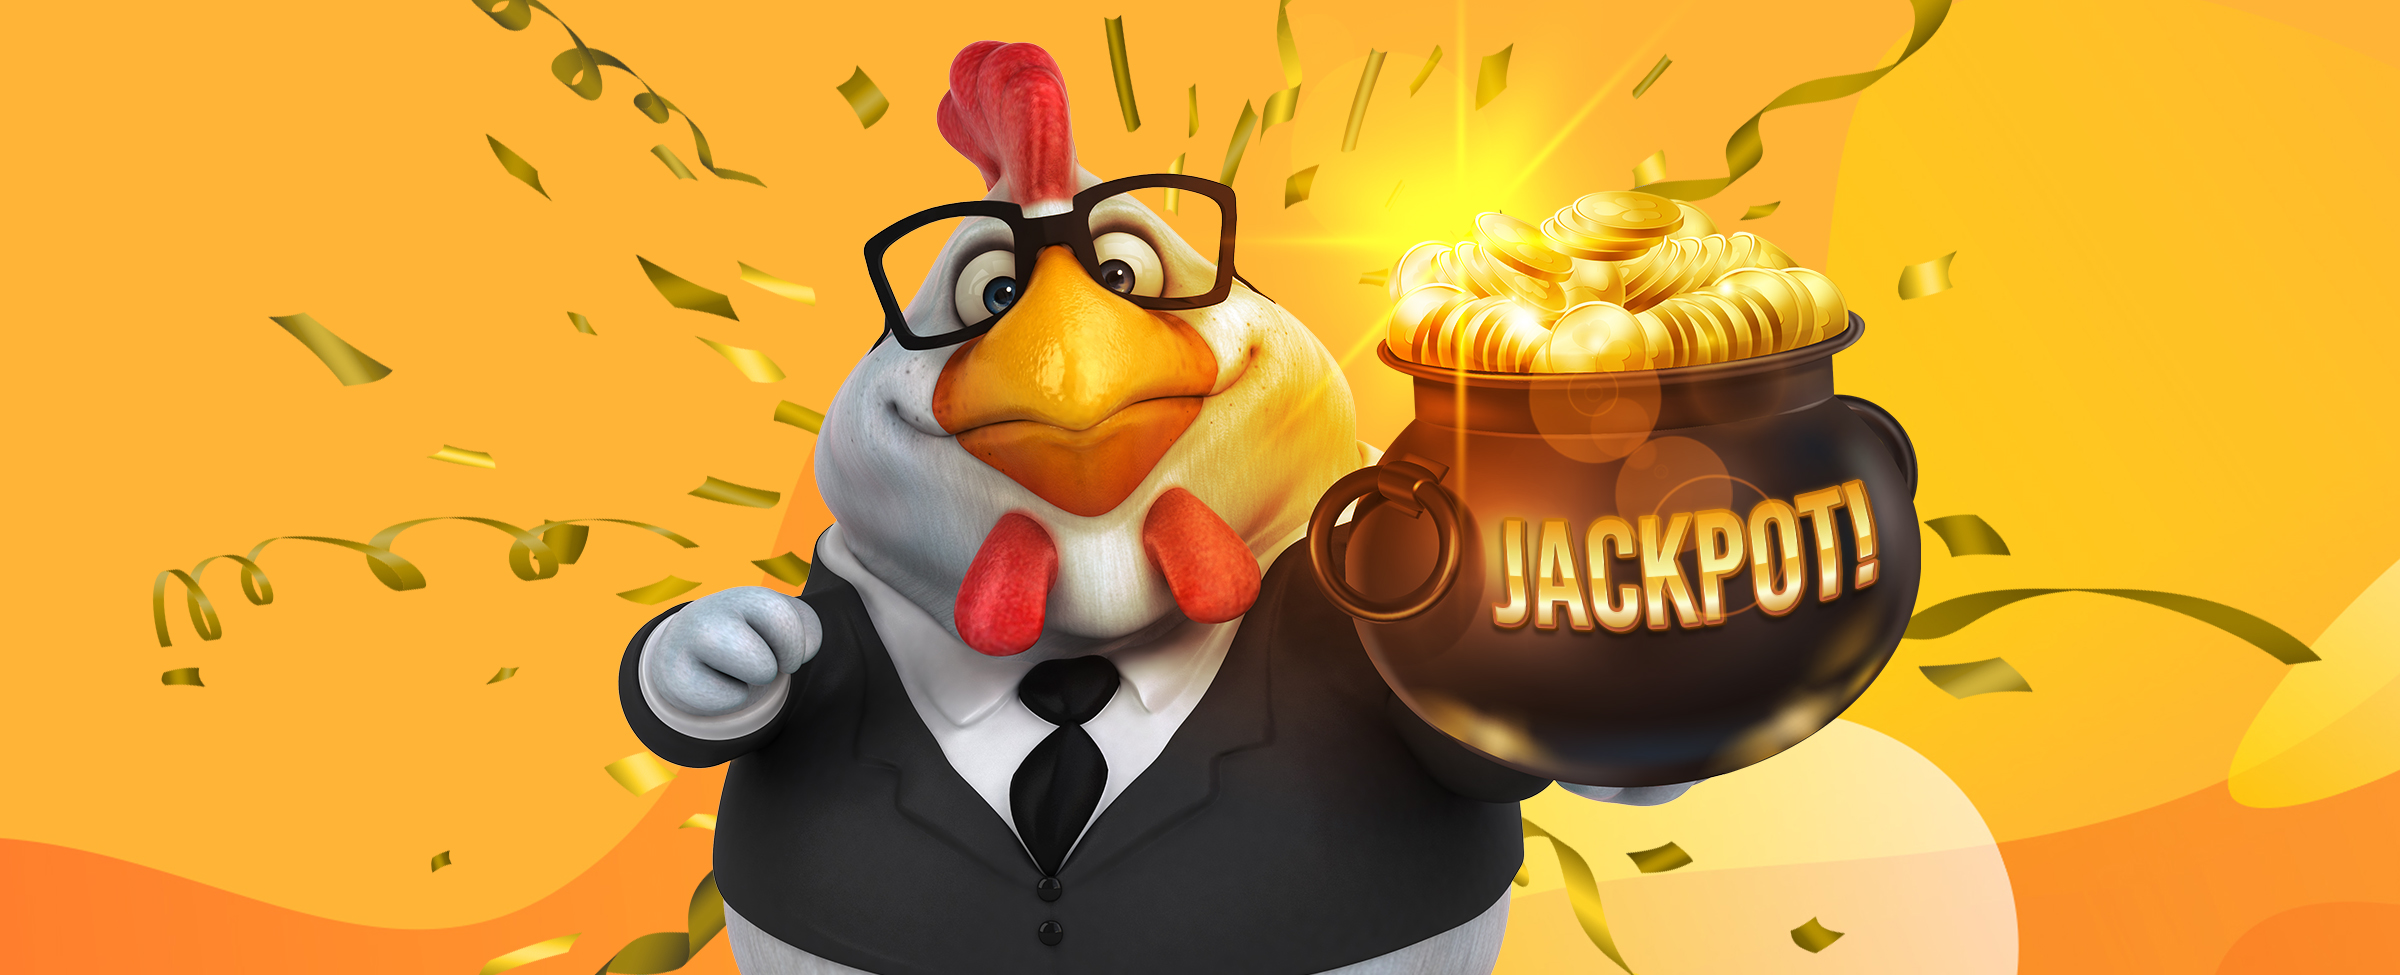 Choosing slots with jackpots is another way you could possibly clean up! Find out more.